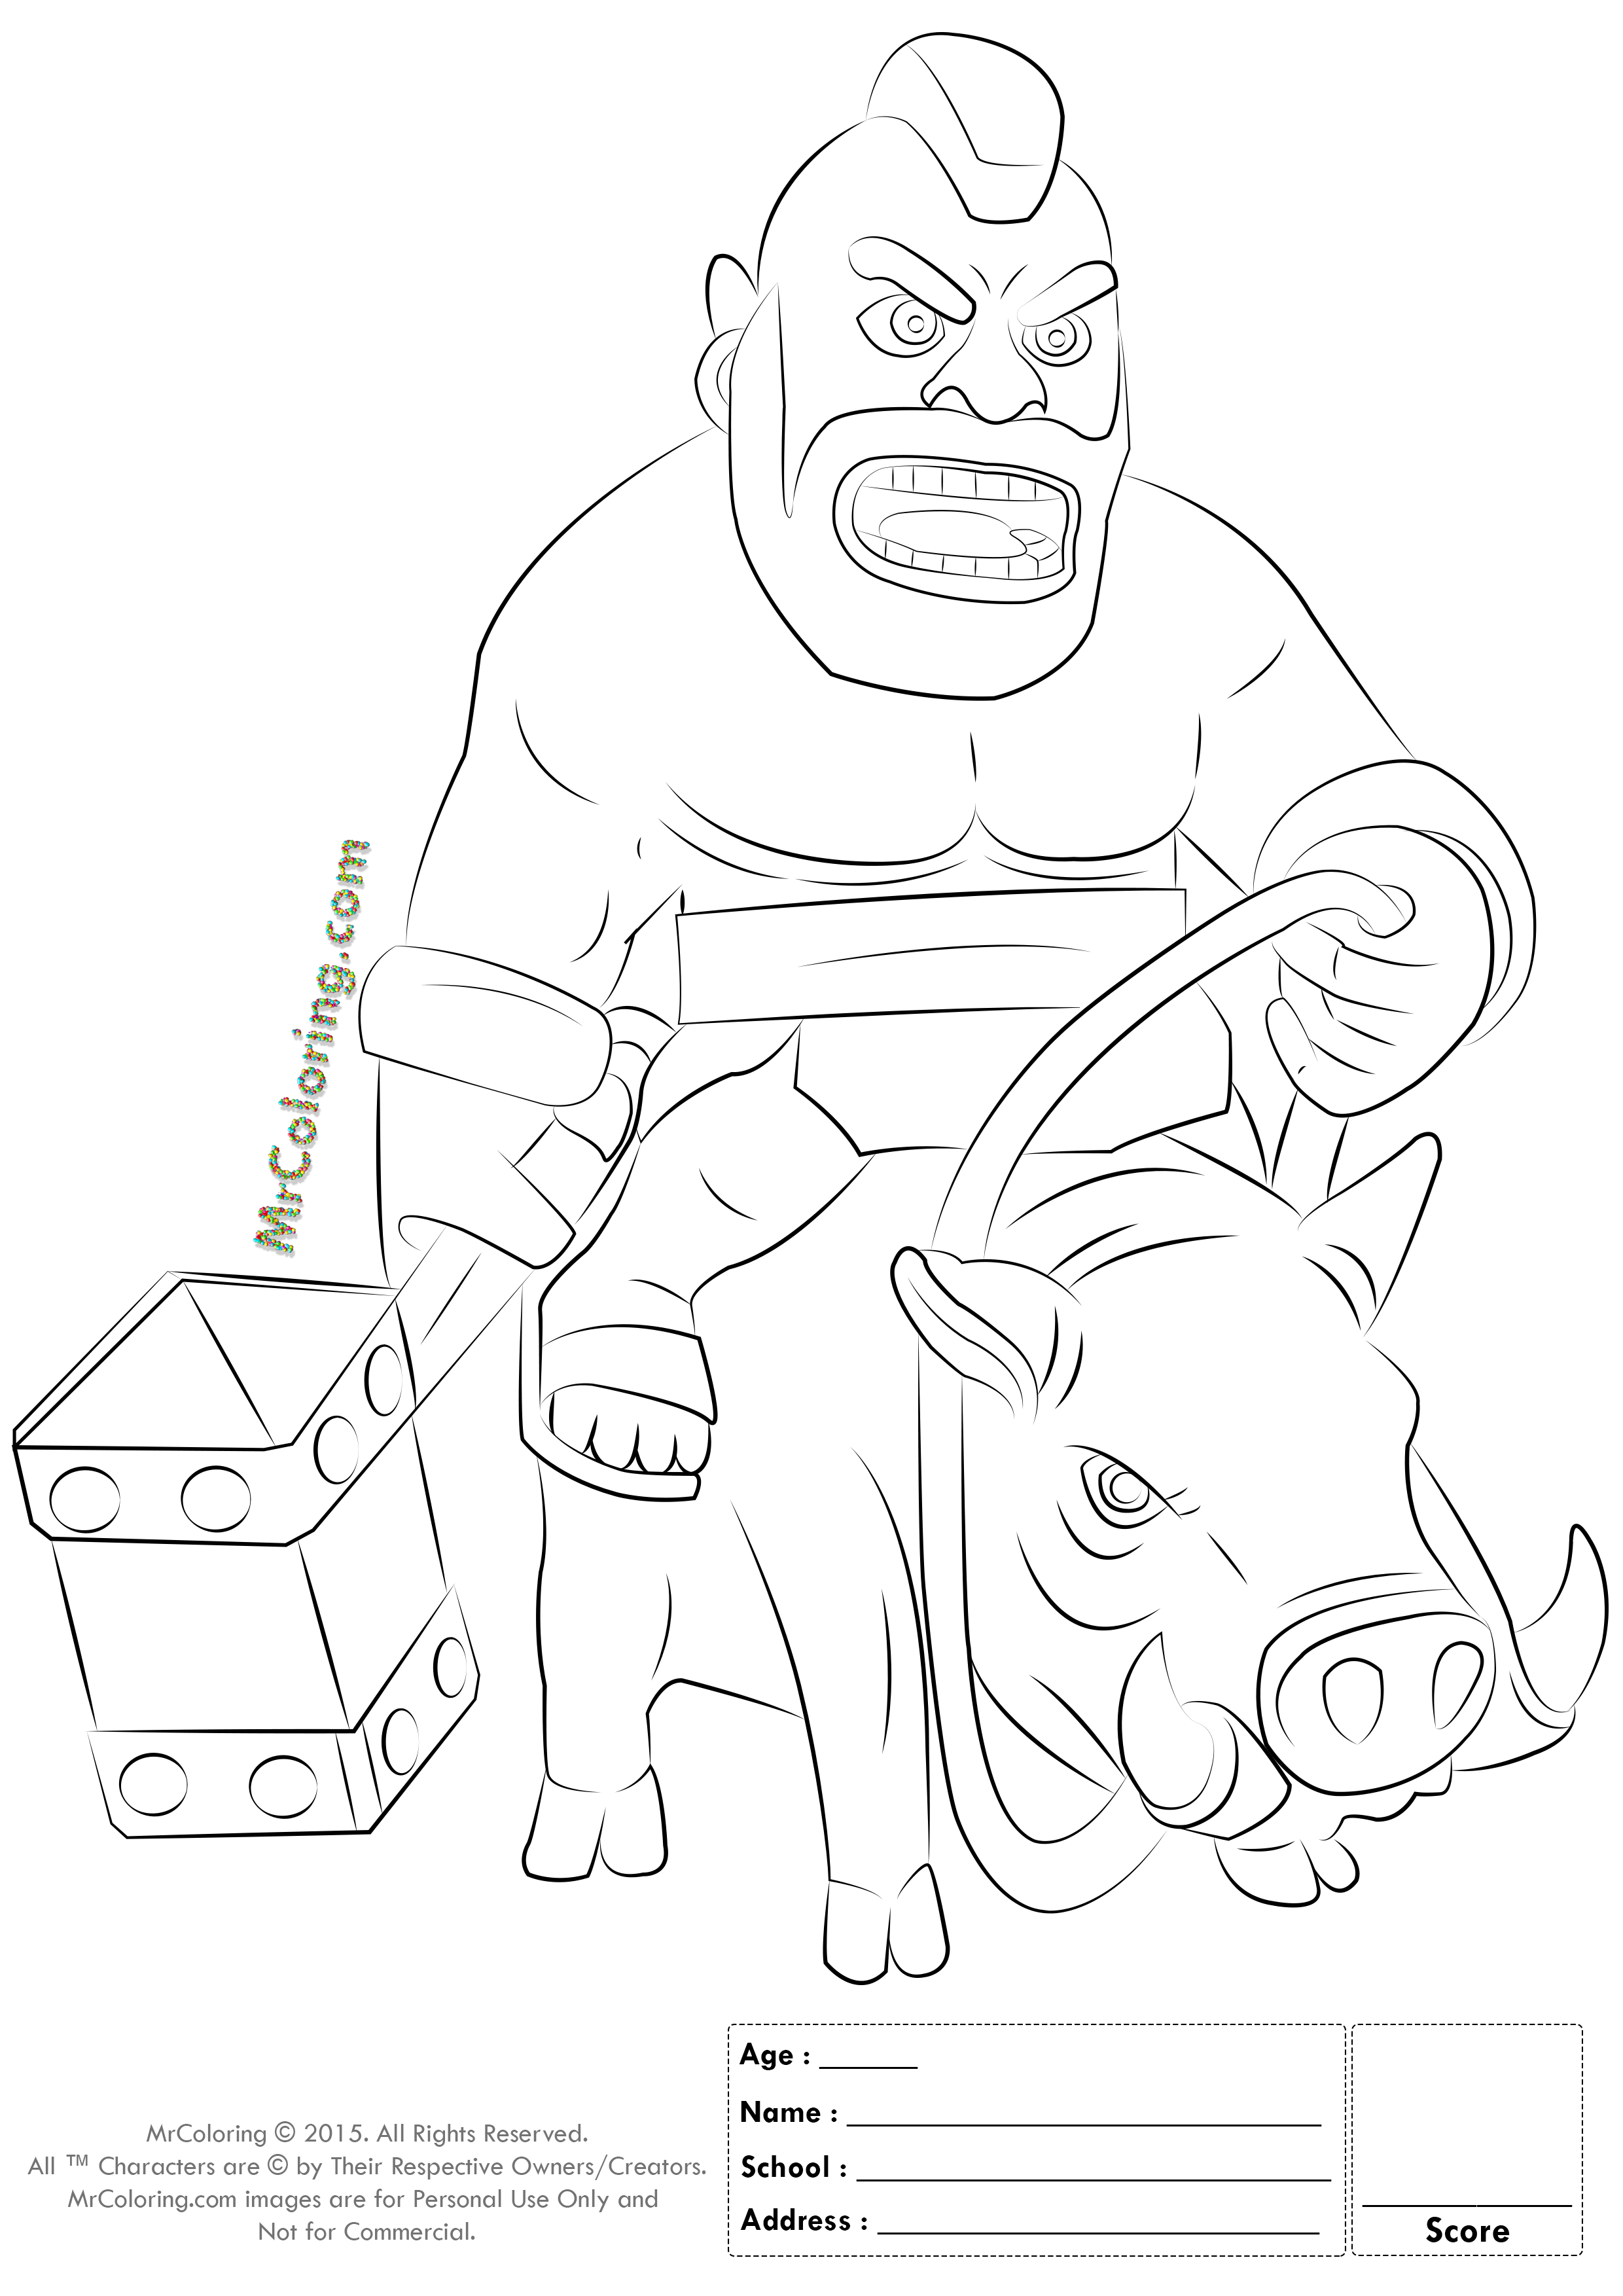 Clash Of Clans Hog Rider Coloring Sketch Coloring Page Coloring Pages Clash Royale Cl